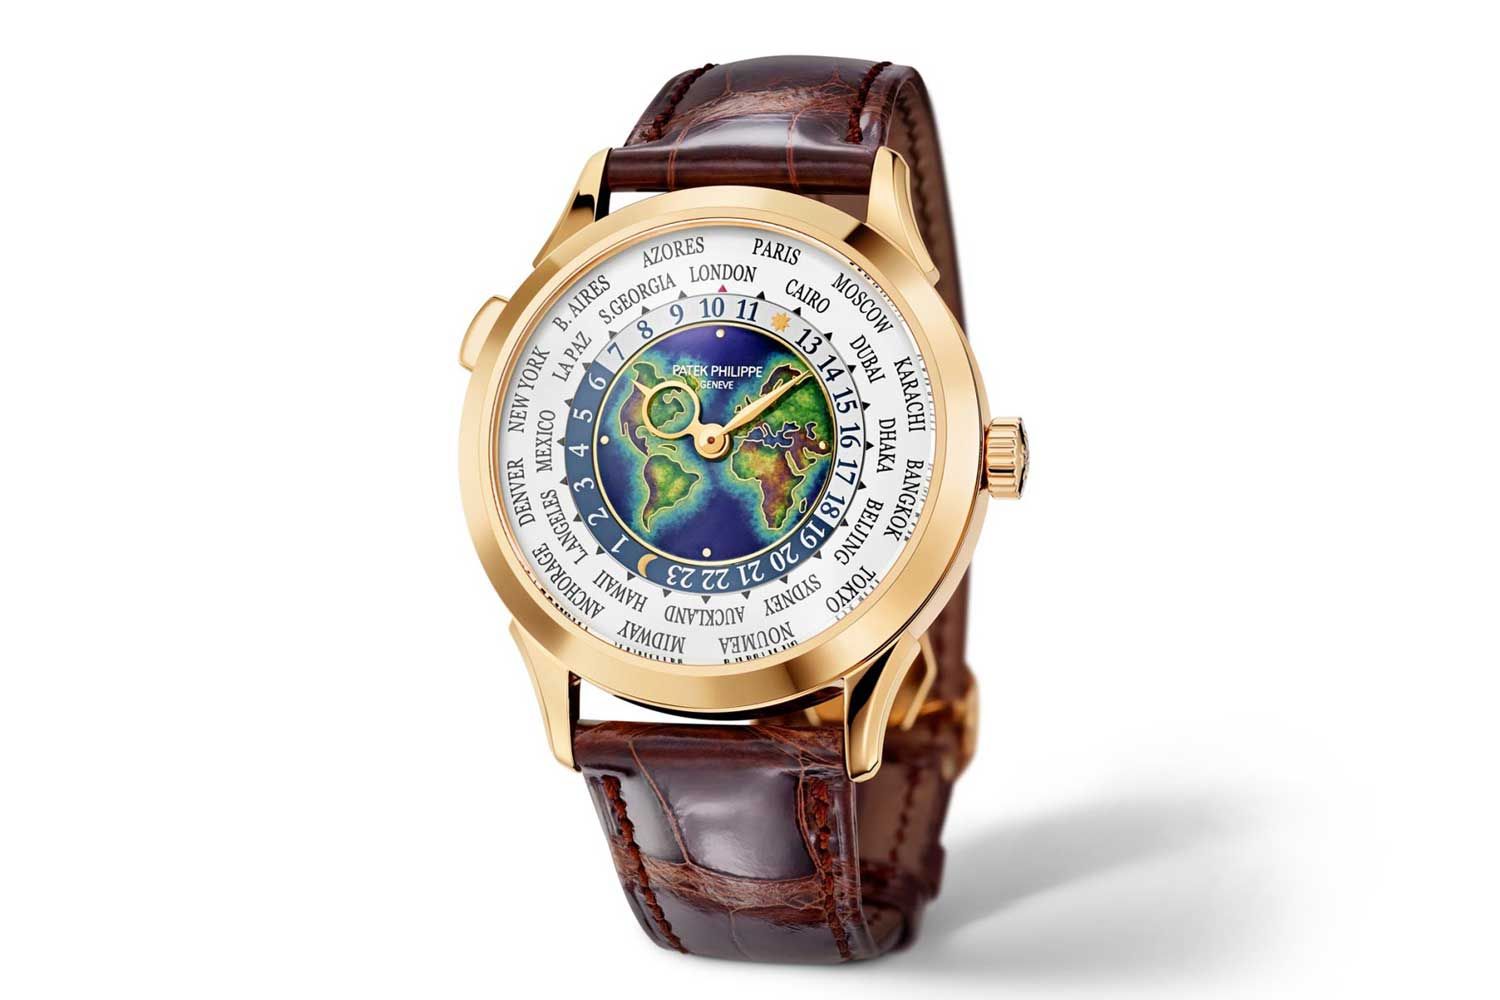 Patek Philippe Reference 5231J World Time with a cloisonné enamel world map on the dial